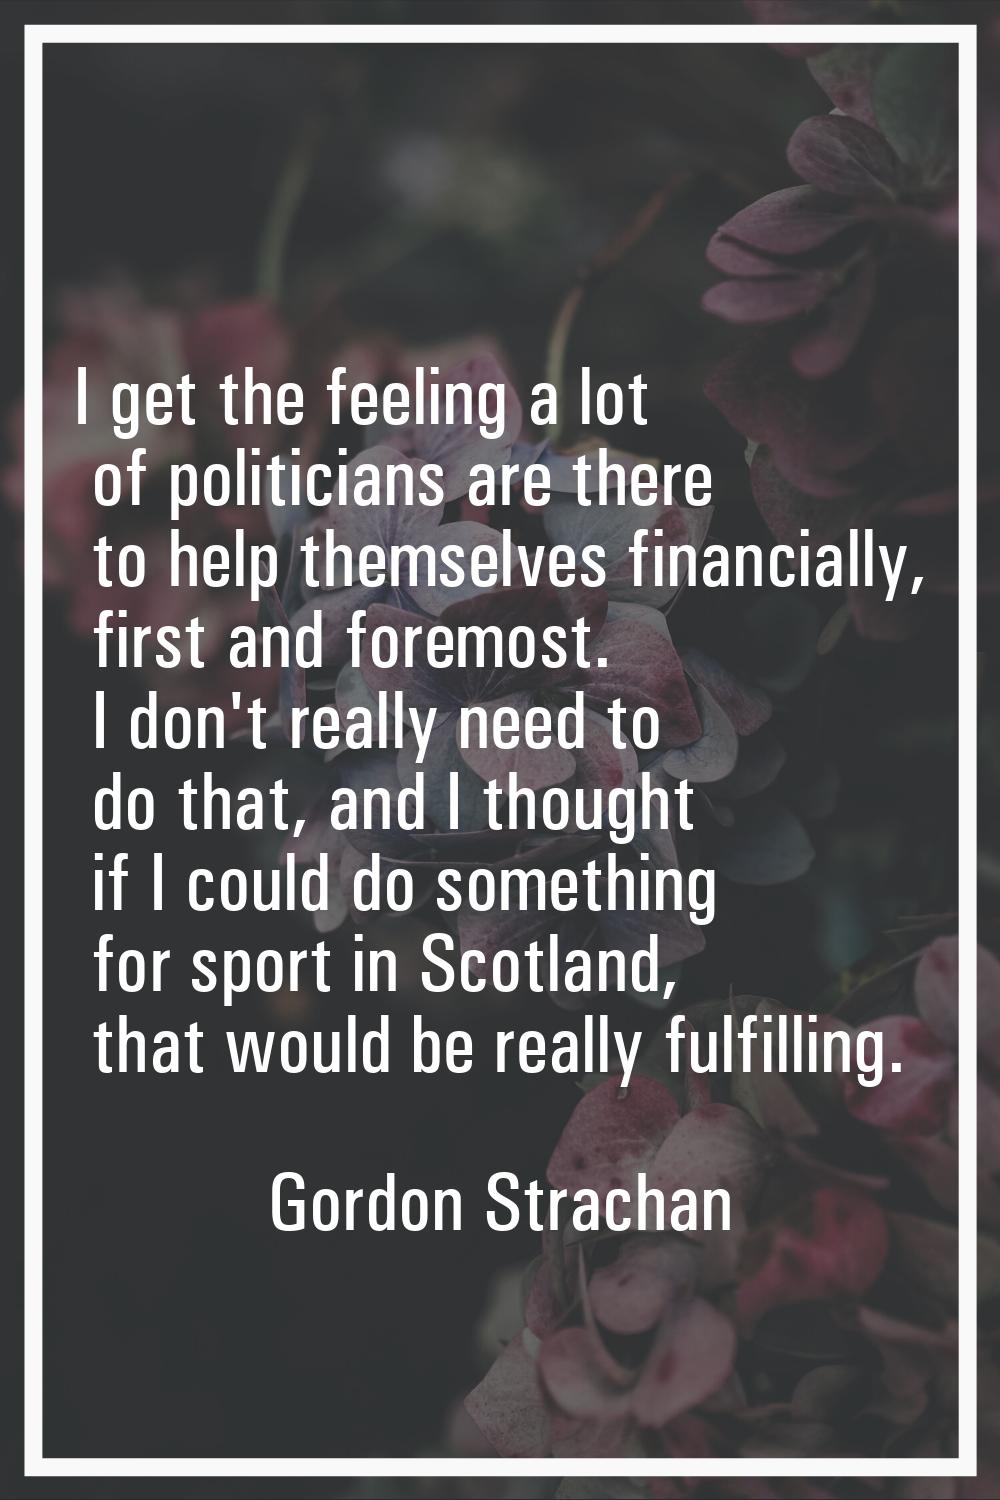 I get the feeling a lot of politicians are there to help themselves financially, first and foremost